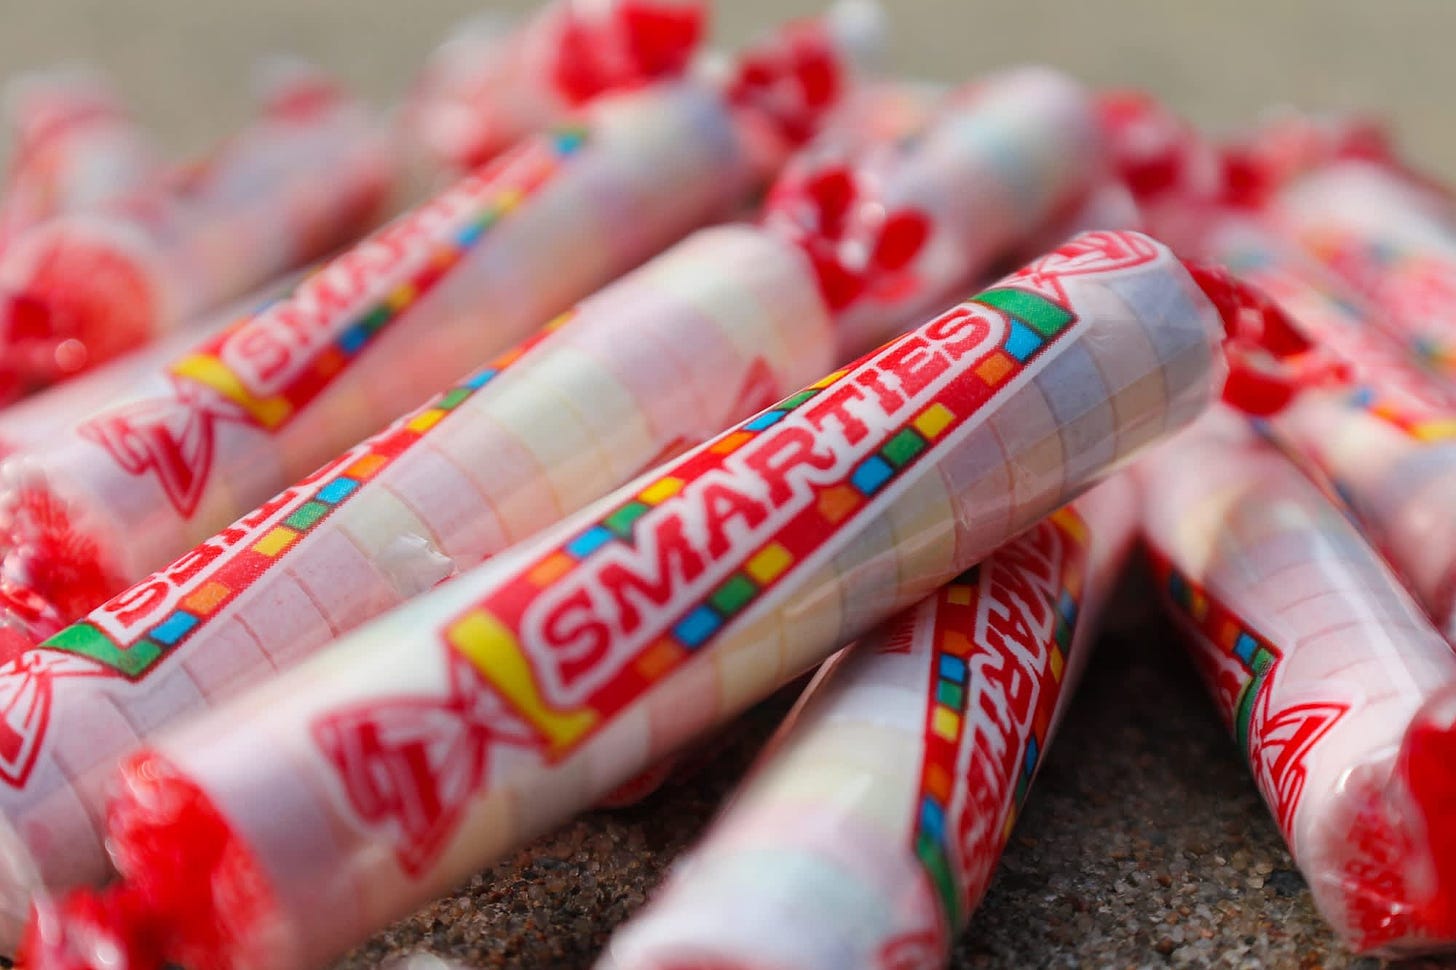 5 things to know about Smarties, the 70-year-old family candy company